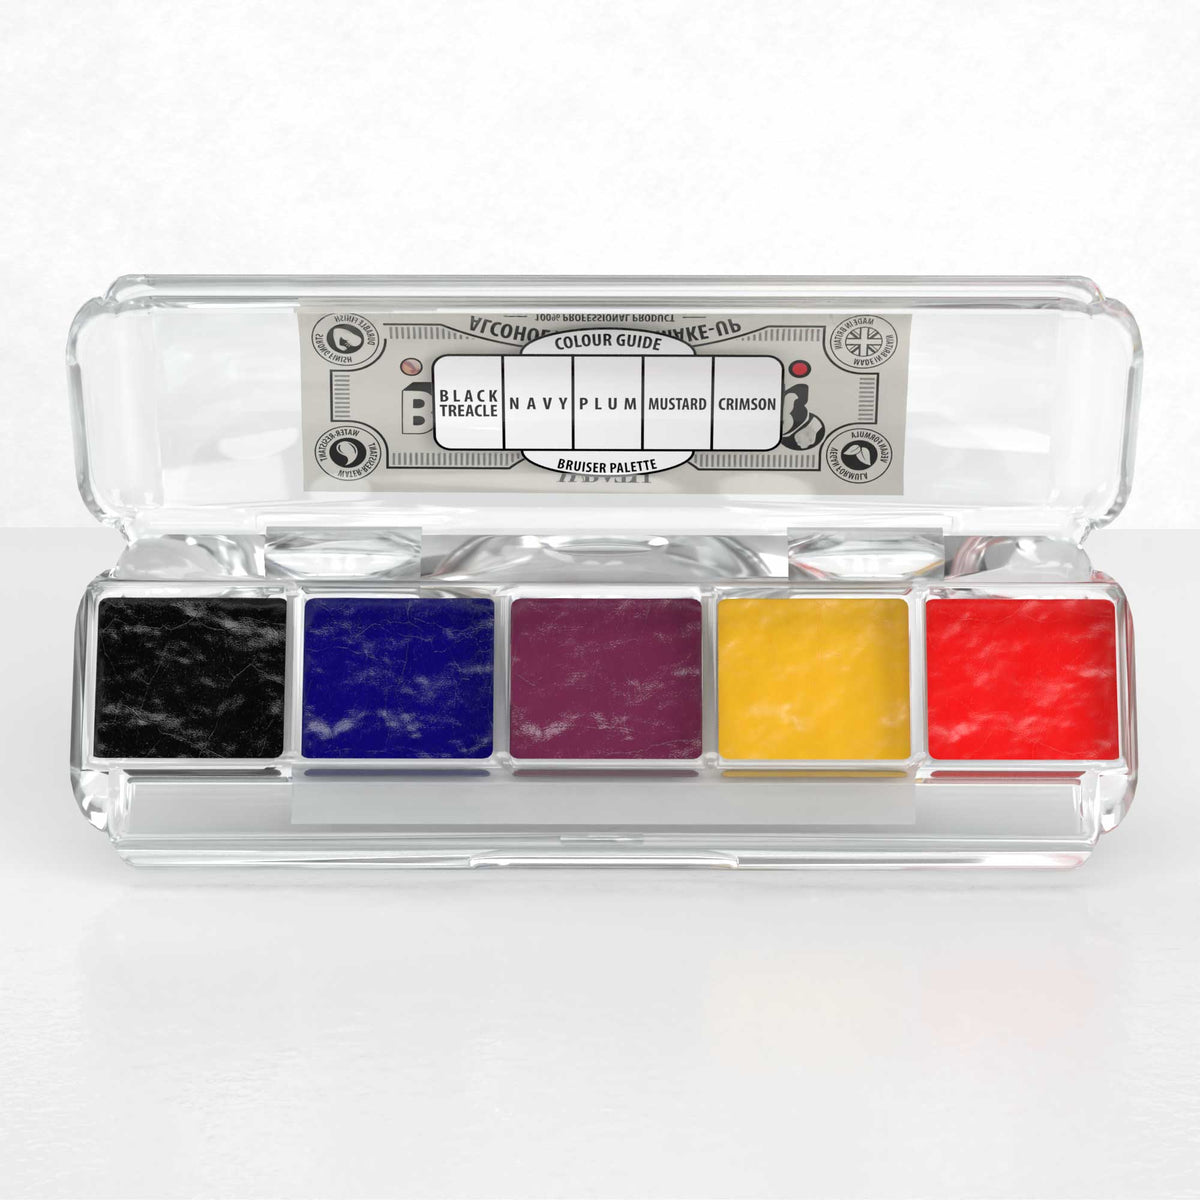 WRATH Alcohol Activated Make-up 5 Palette - Bruiser